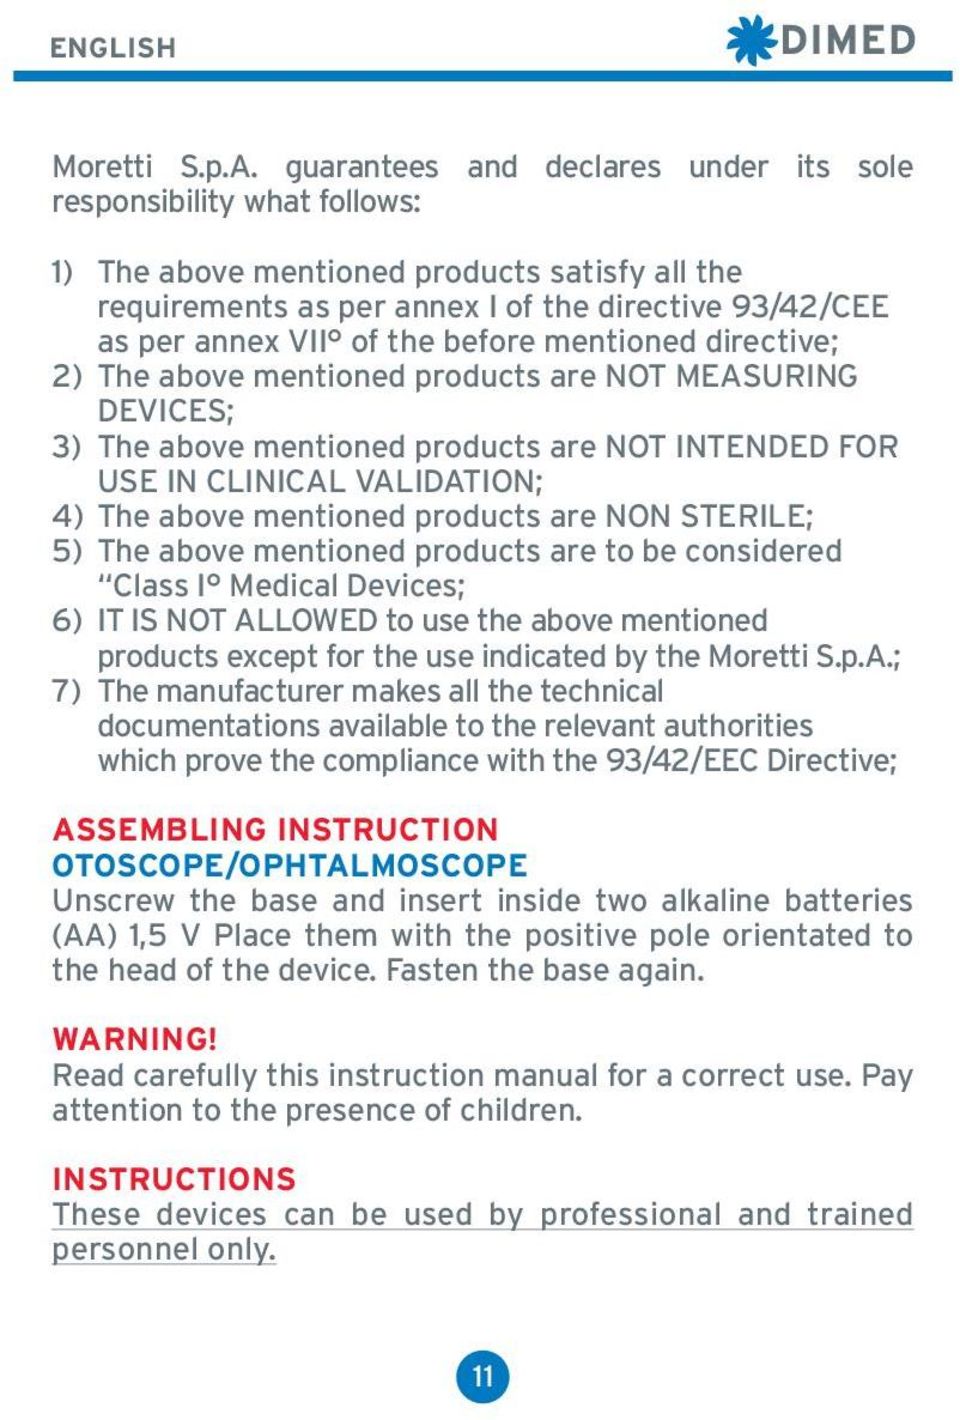 before mentioned directive; 2) The above mentioned products are NOT MEASURING DEVICES; 3) The above mentioned products are NOT INTENDED FOR USE IN CLINICAL VALIDATION; 4) The above mentioned products